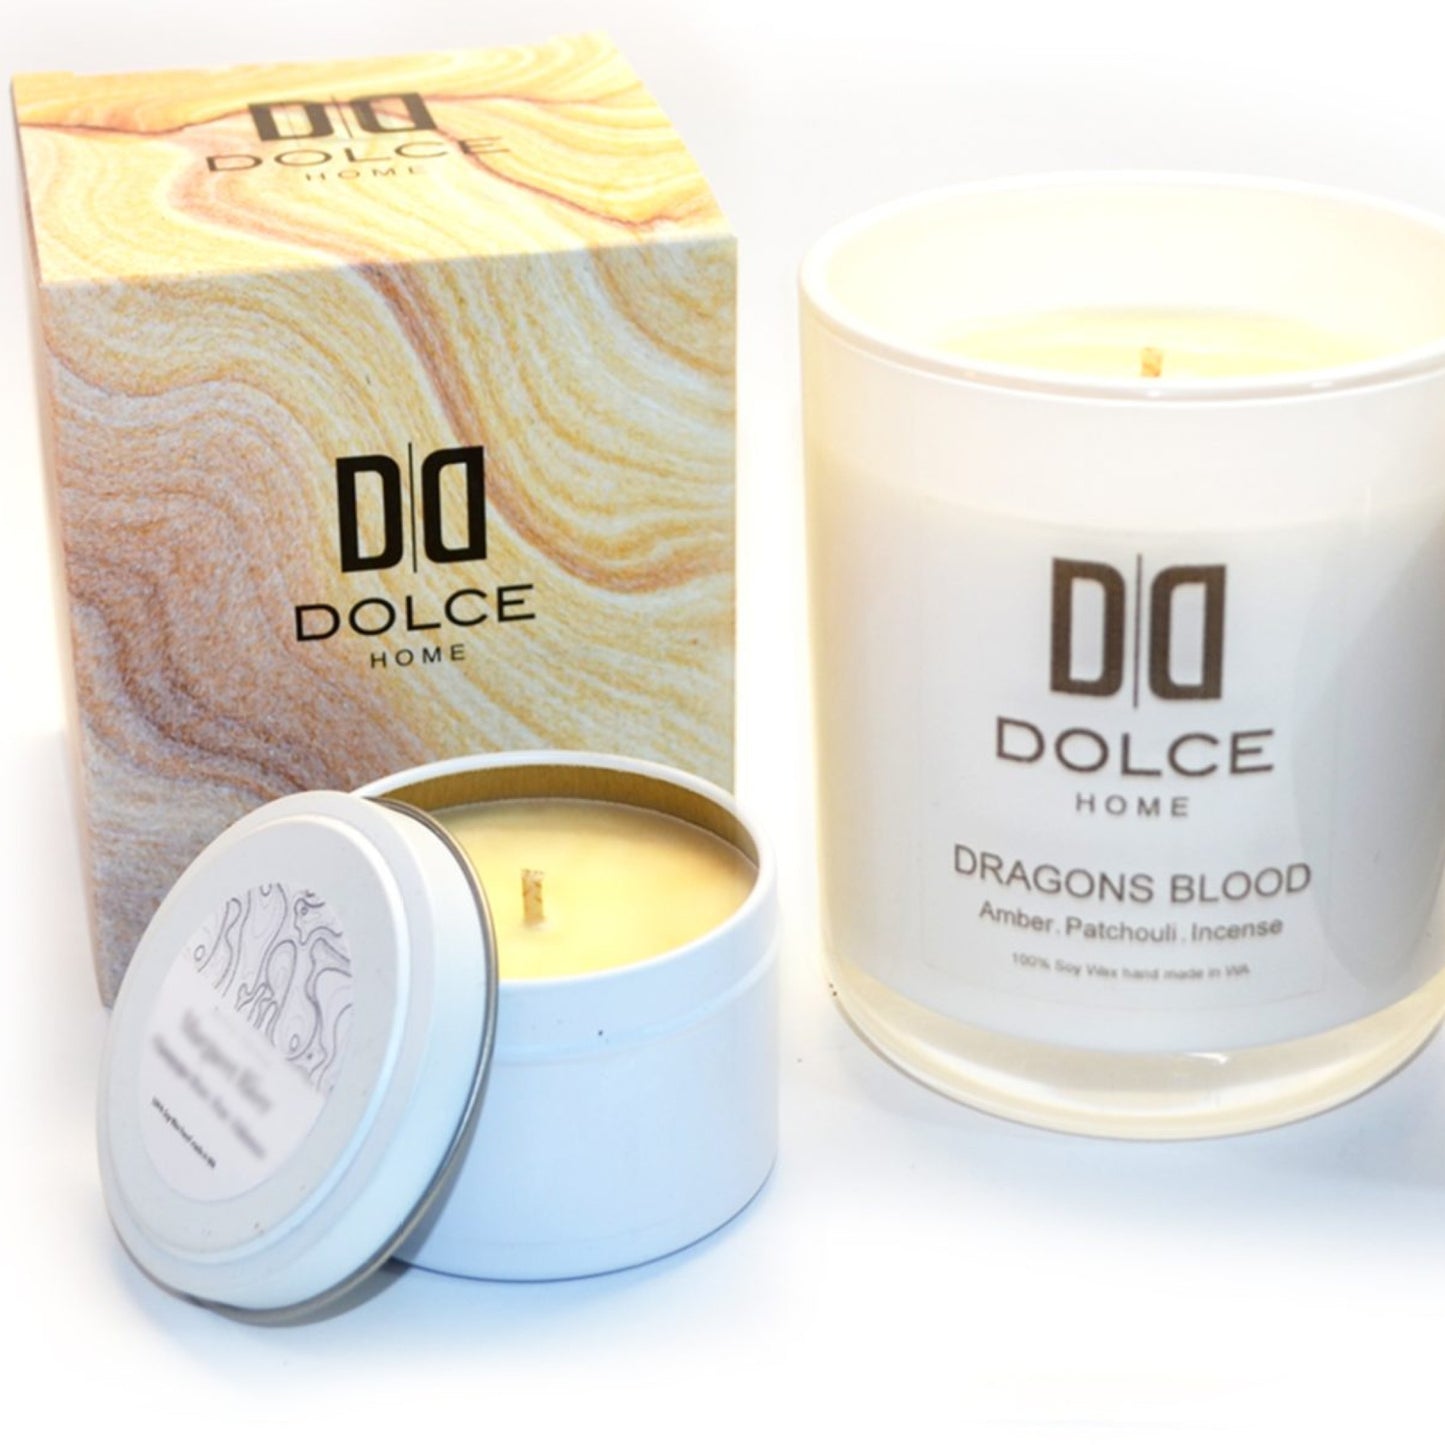 Dragons Blood | 300g Soy Wax Candle | Dolce Home | Handmade in W.A.